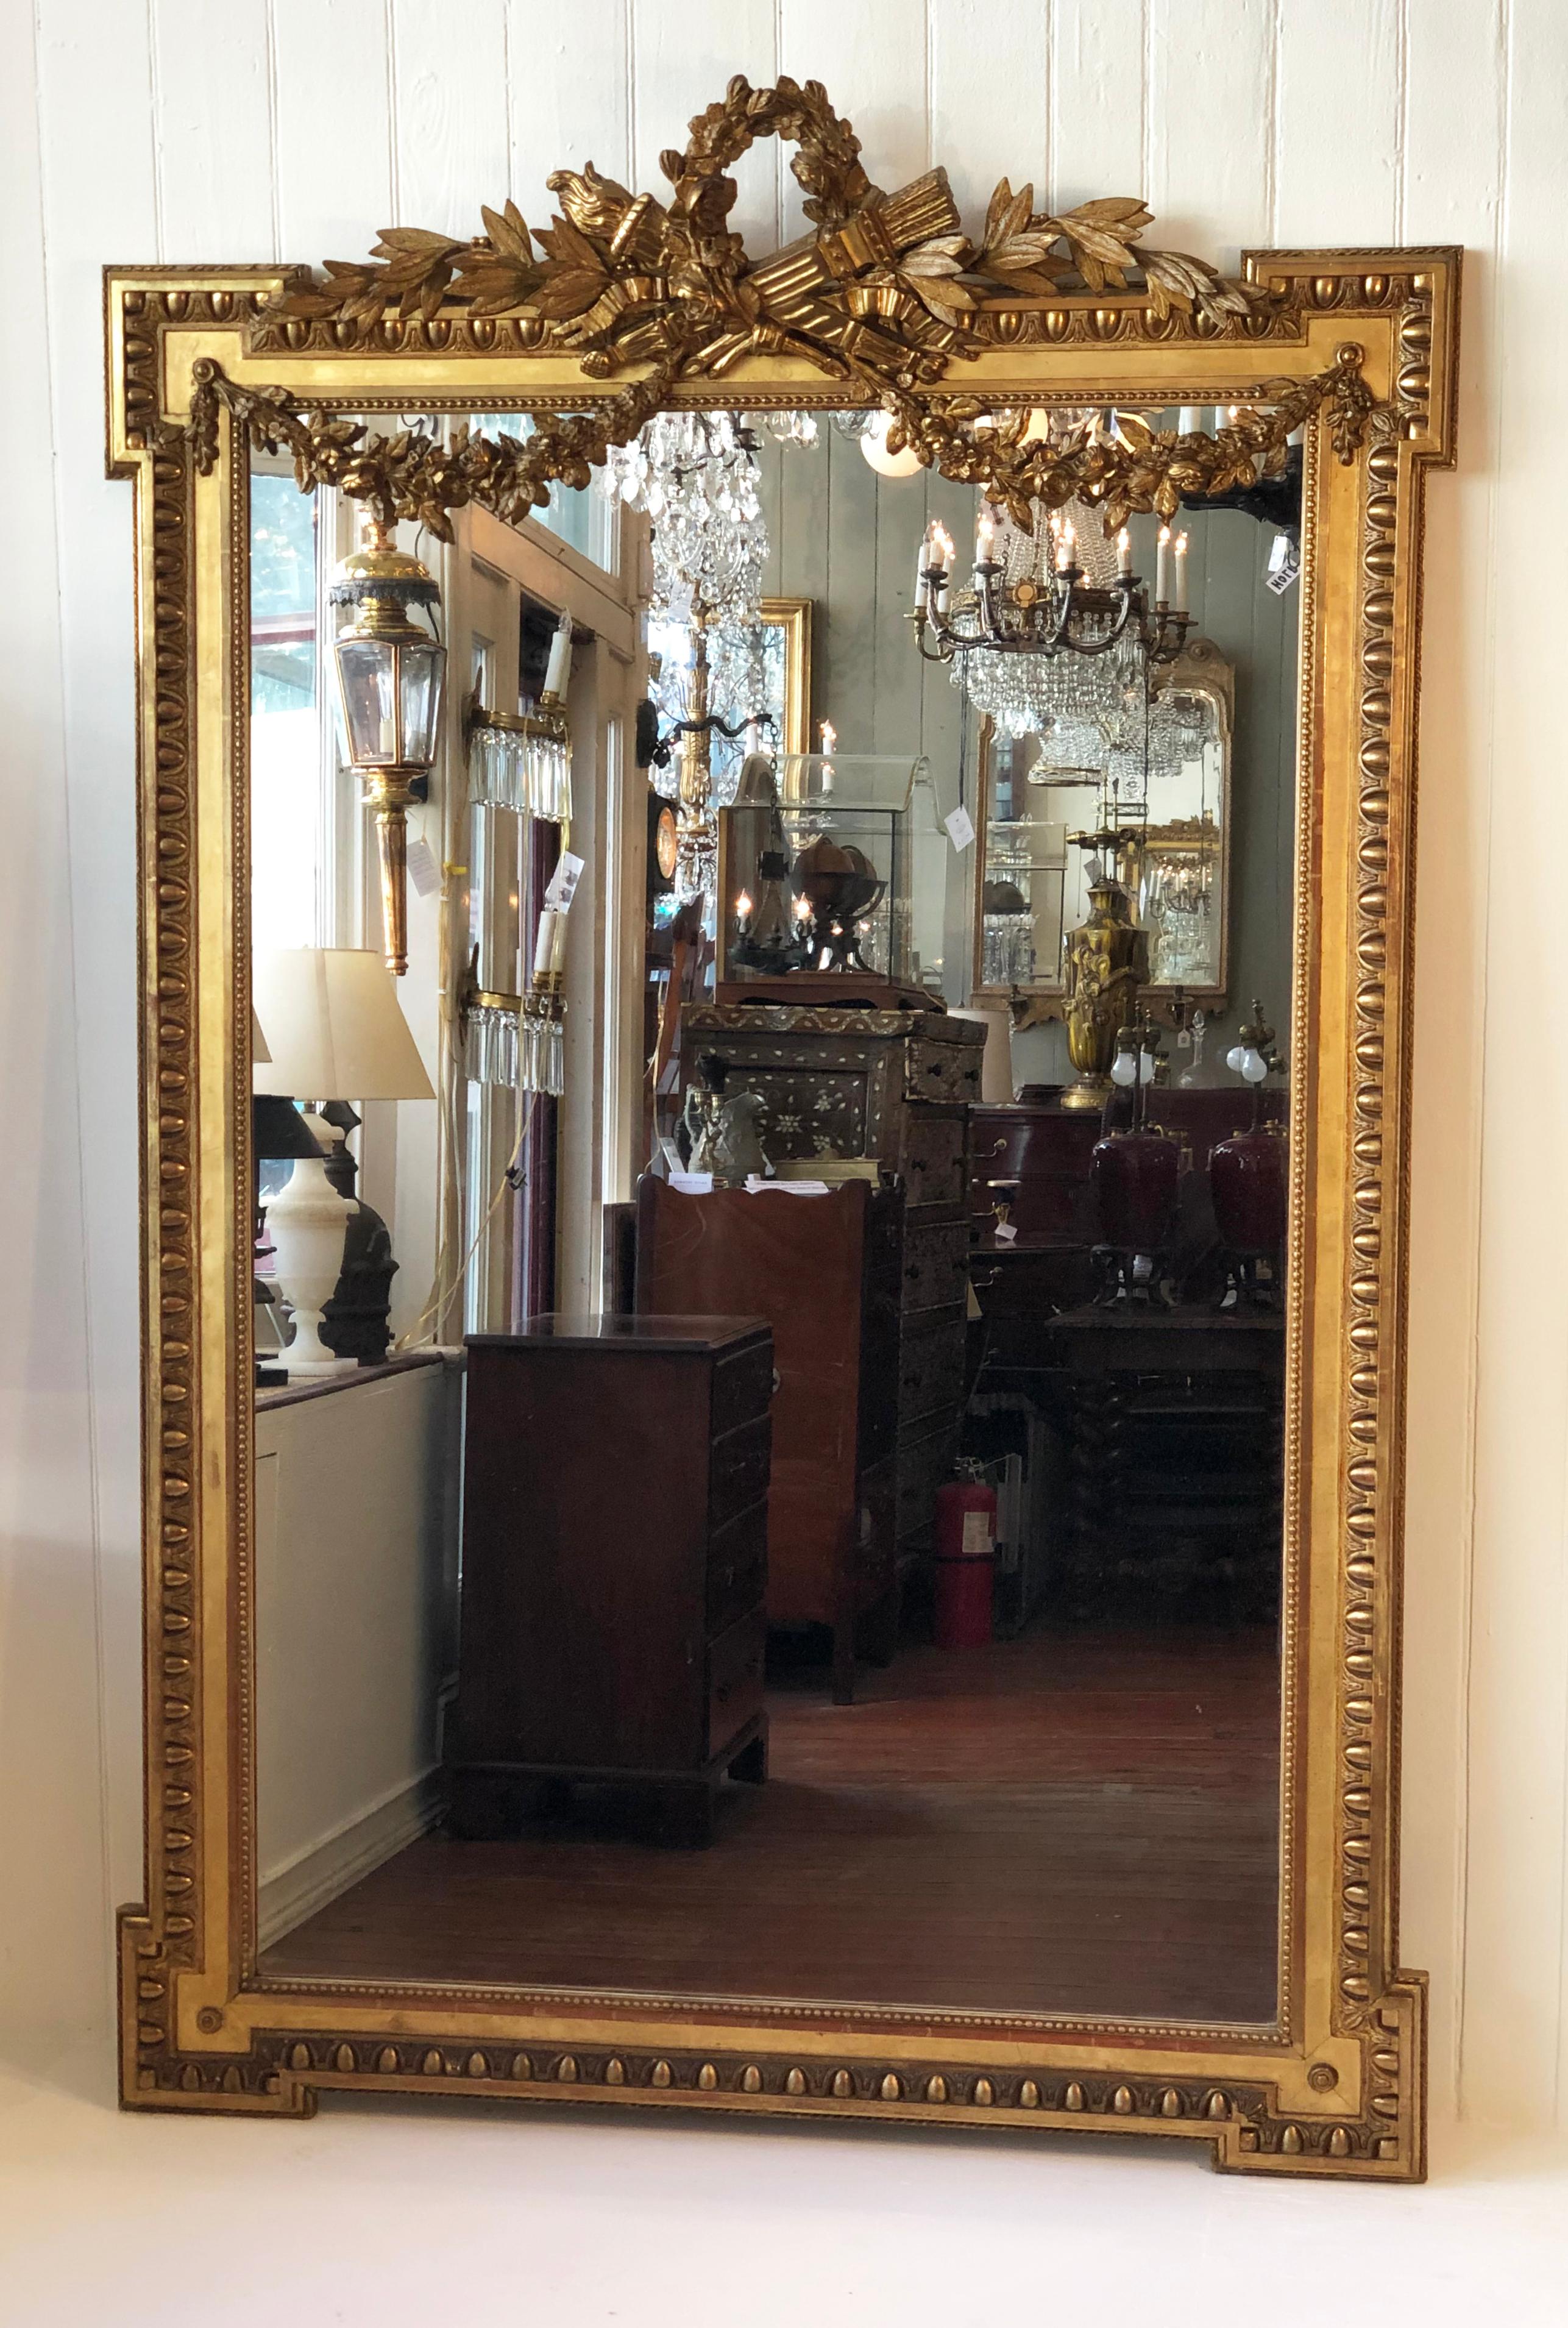 Grand 19th century French Louis XVI style gilded mirror, circa 1840-1860. This wonderful mirror is adorned with a floral wreath cartouche, also having crossed flambeau and quiver in the center of the cartouche above garland swags. The frame has four